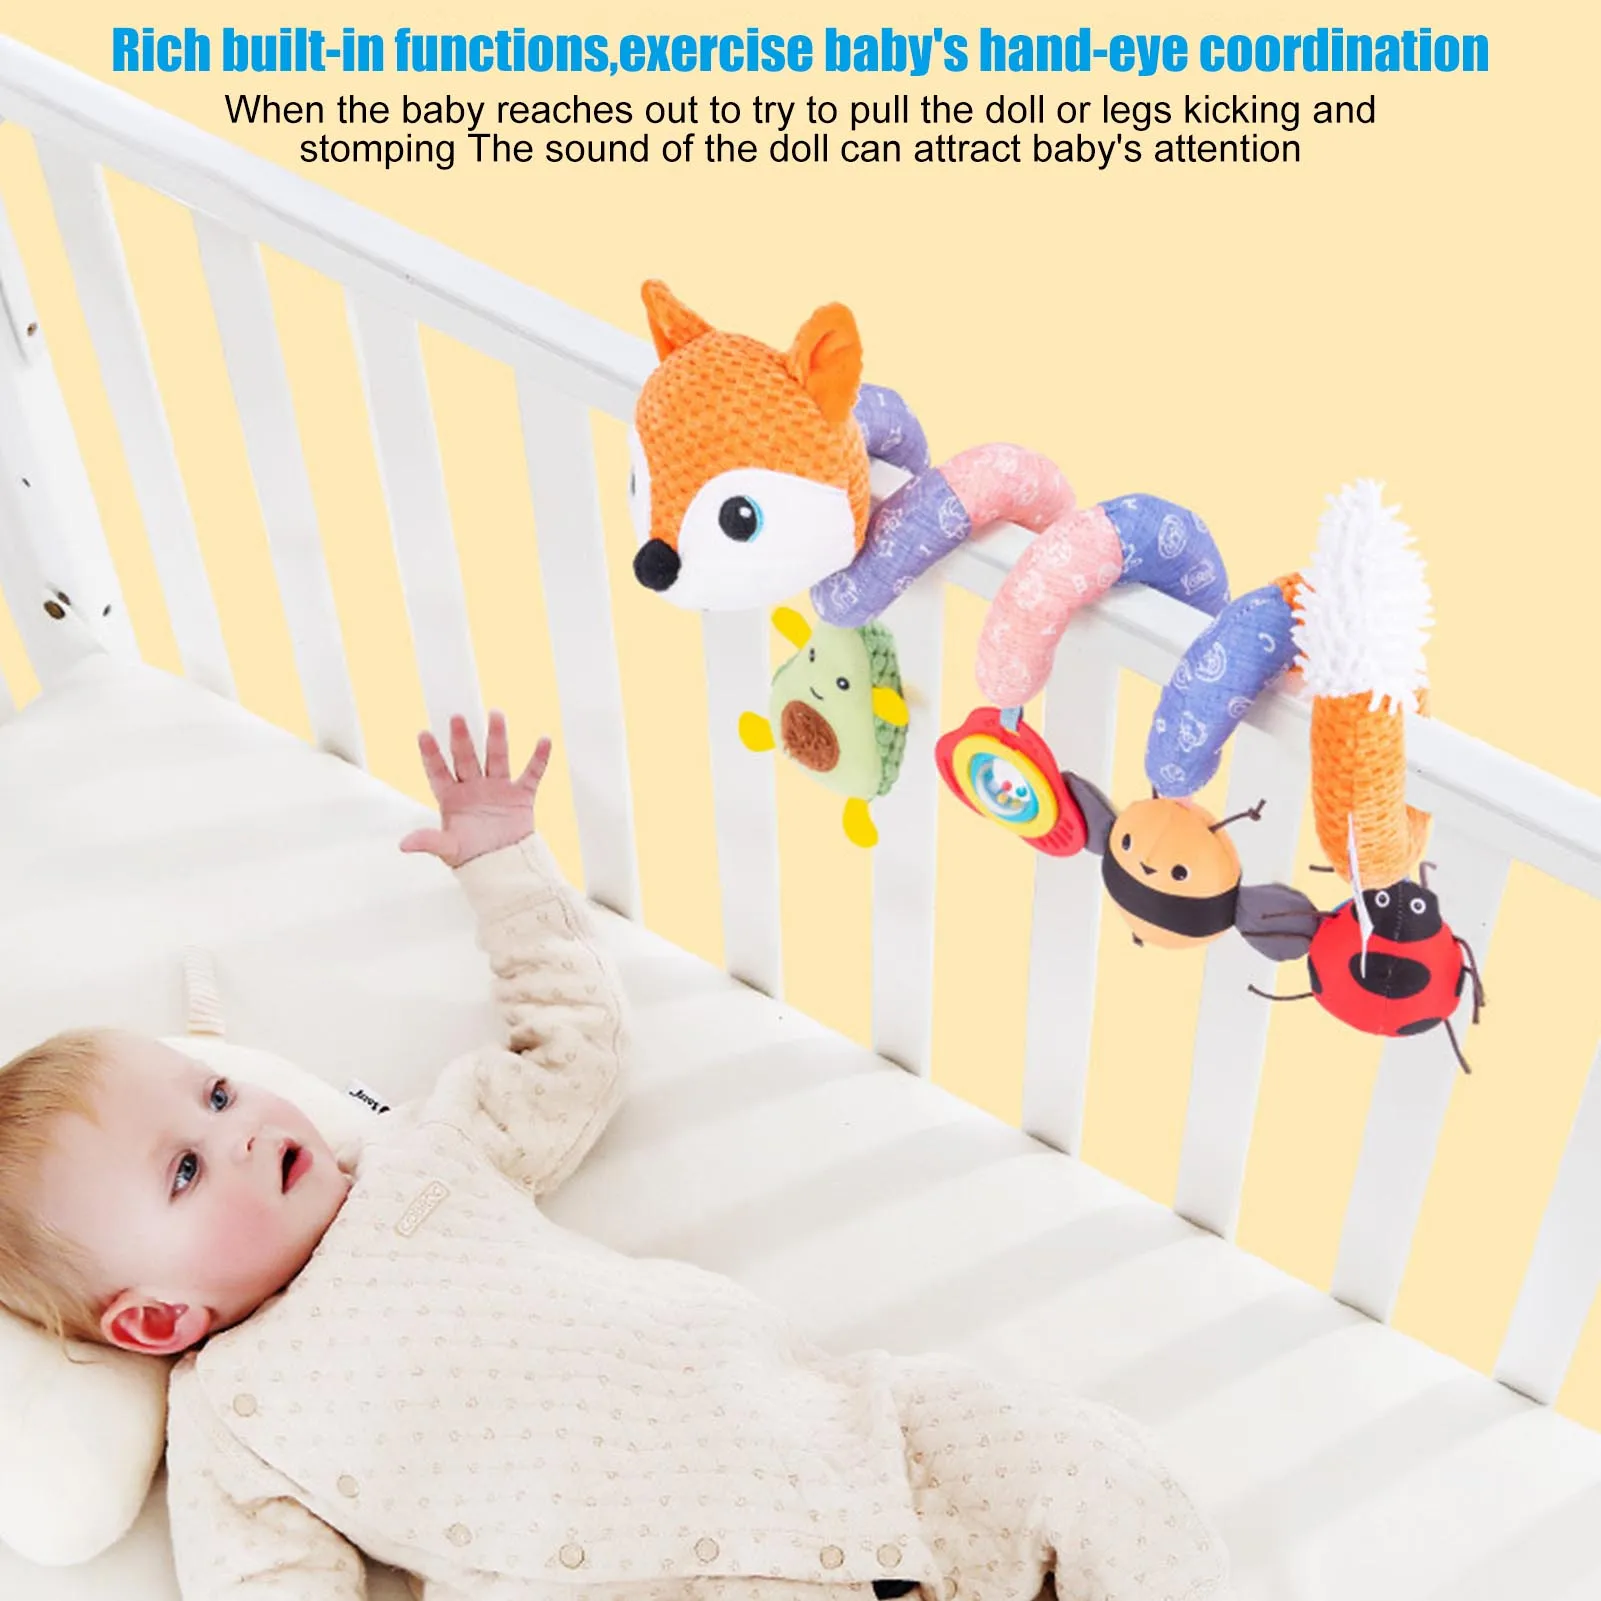 

Baby Stroller Rattle Toys Crib Pram Spiral Toys Fox Bed Wrap Hanger Musical Activity Play Center For Toddlers Newborn Infants